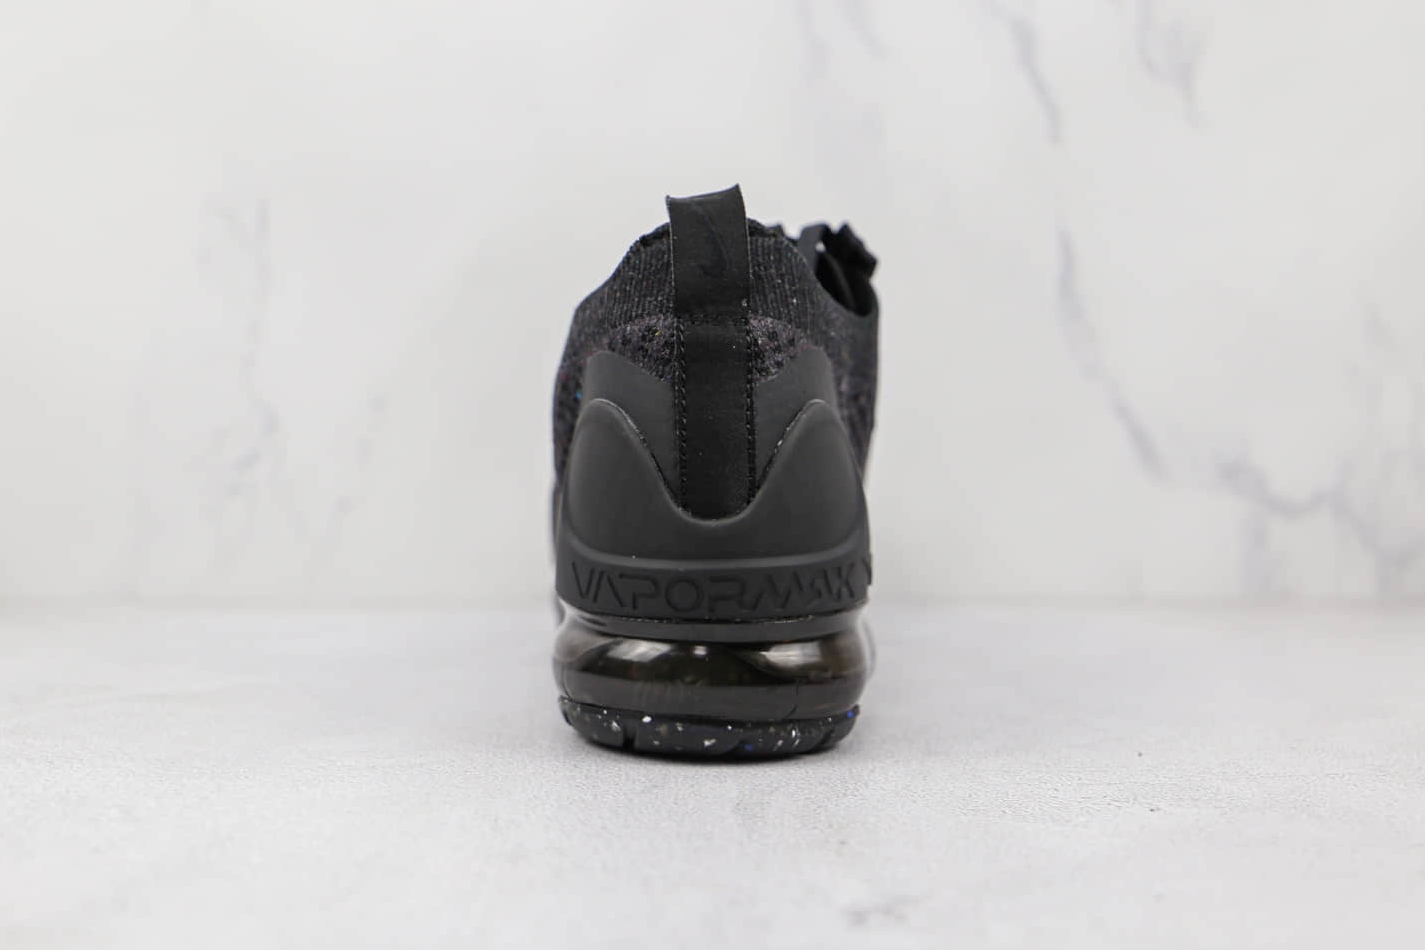 Nike Air VaporMax 2021 Flyknit 'Triple Black' DH4084-001 - Lightweight Comfort and Sleek Style for Every Step